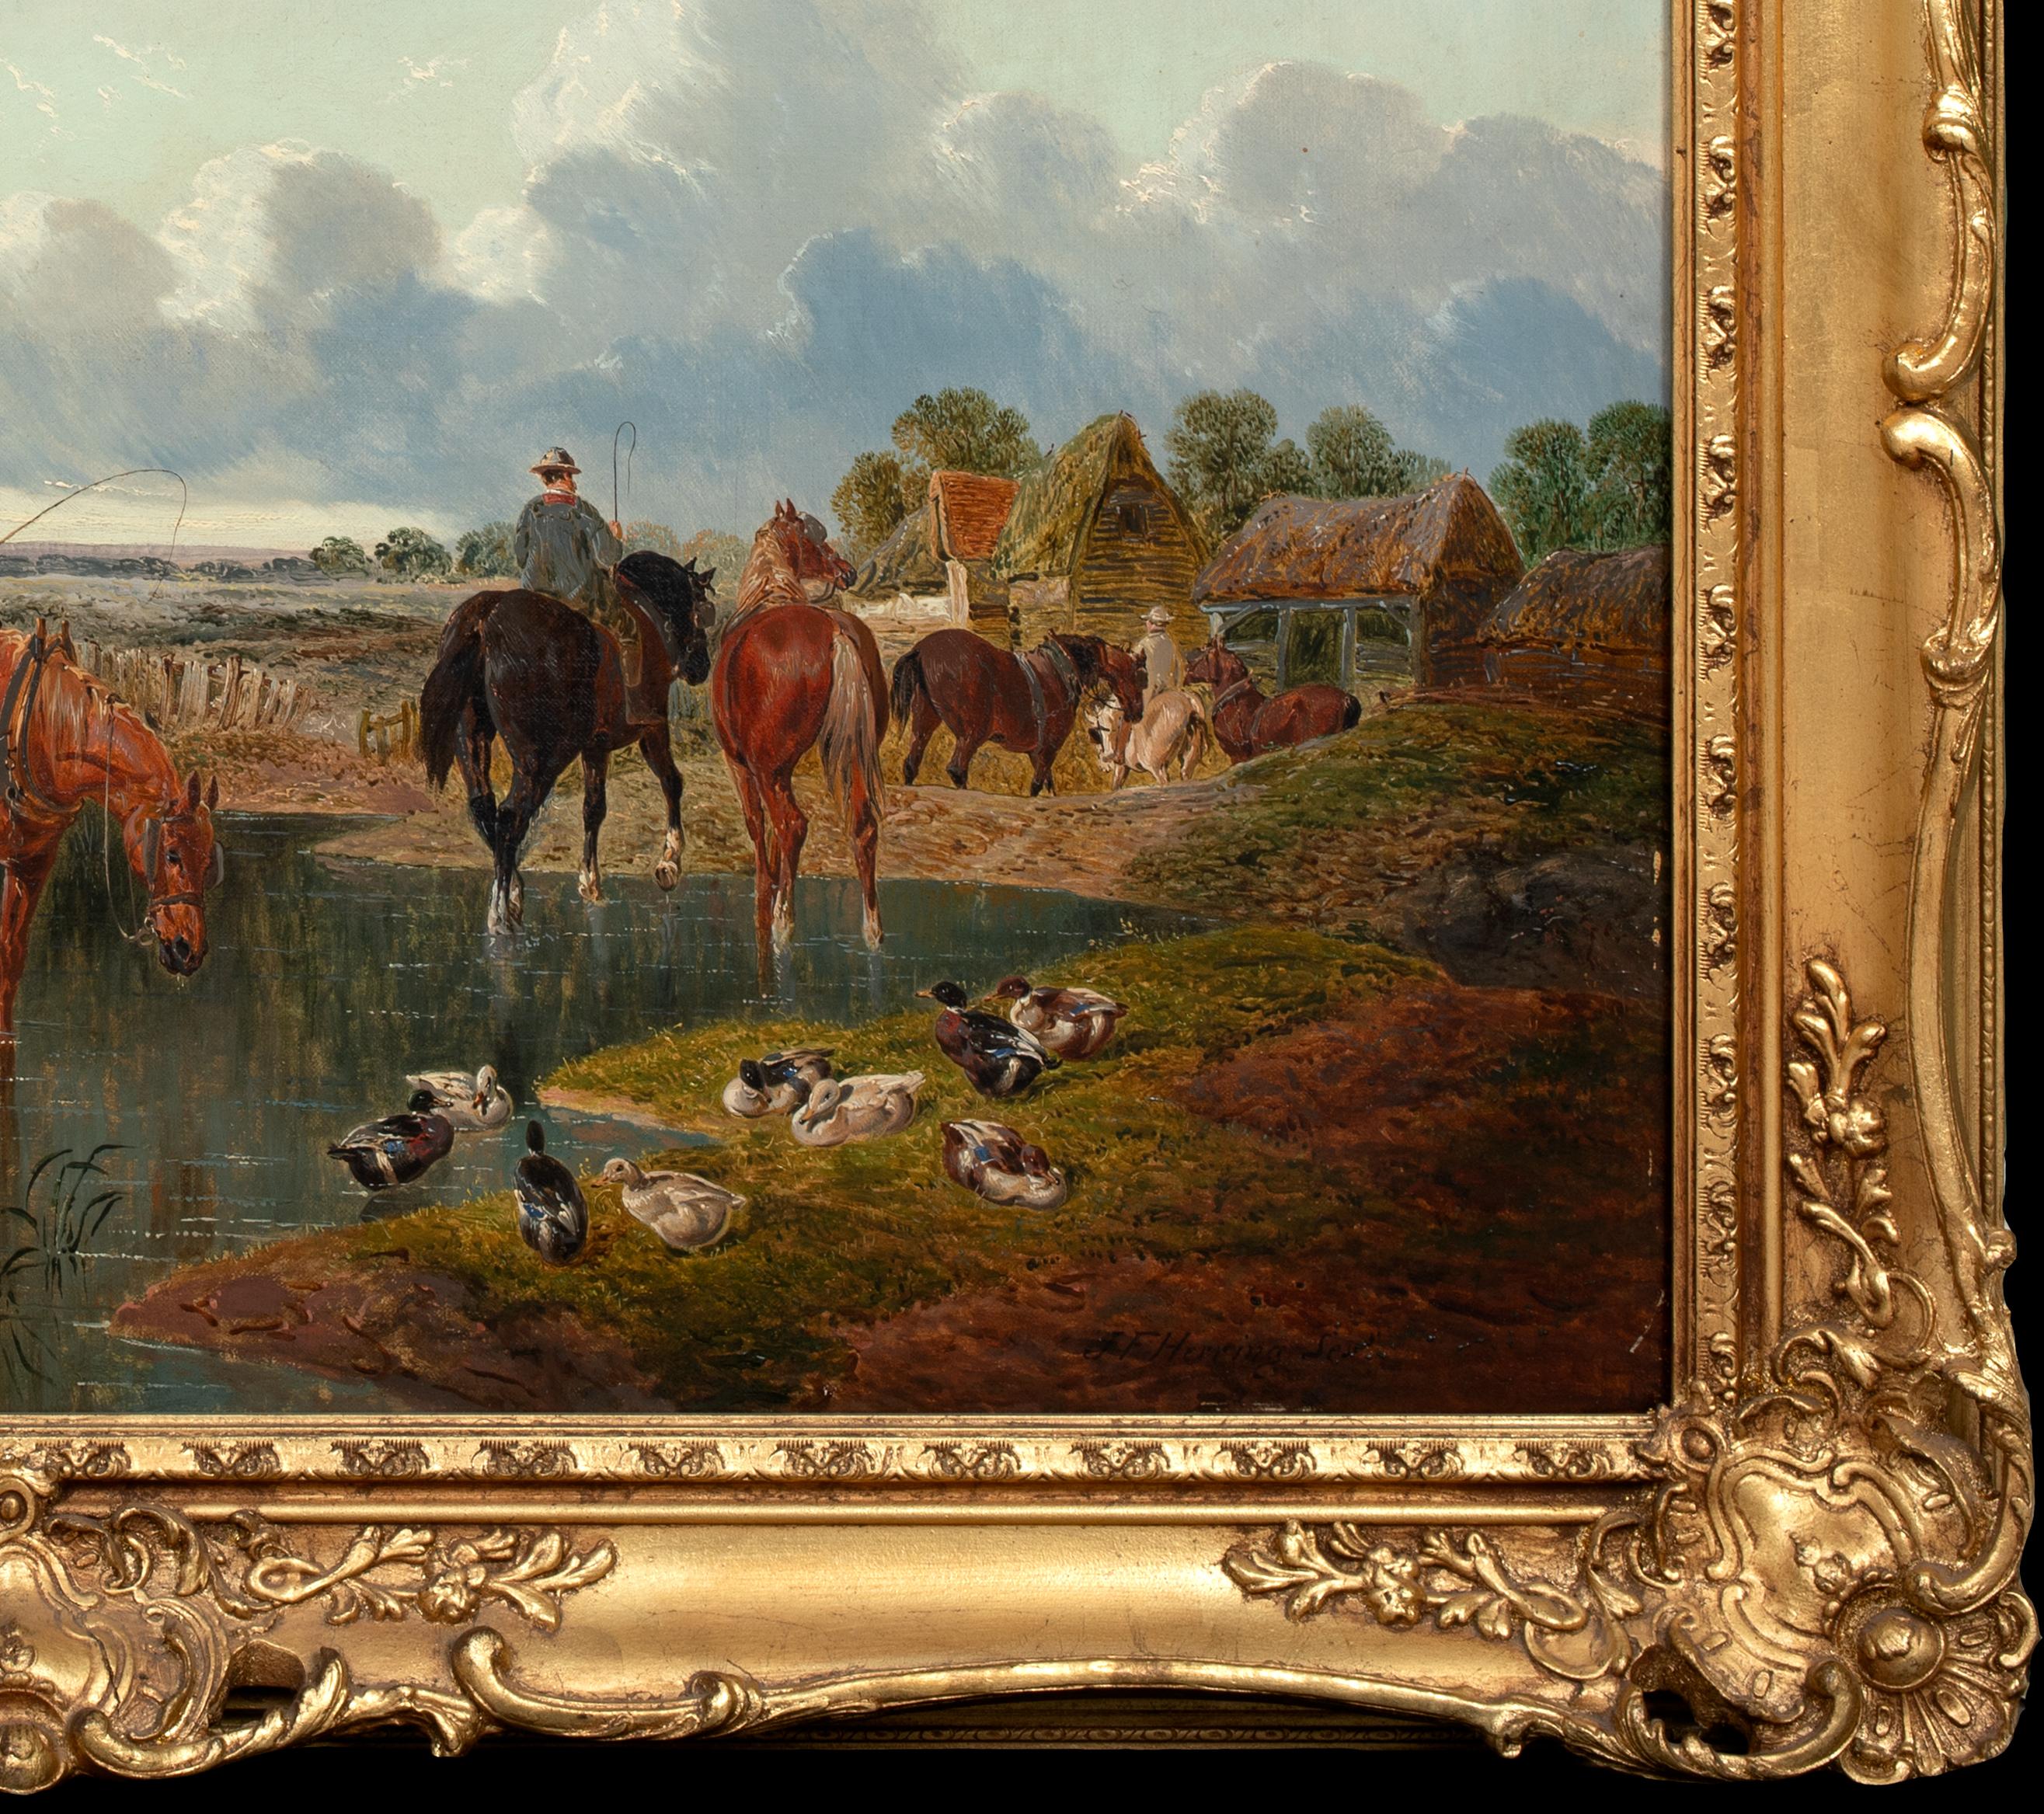 Horses Watering On The Farmstead, 17th Century 

by John Frederick II HERRING (1815-1907) sales to $250,000

Large 19th Century English landscape of horses watering on the return to the farmstead, oil on canvas by John Frederick Herring. Excellent